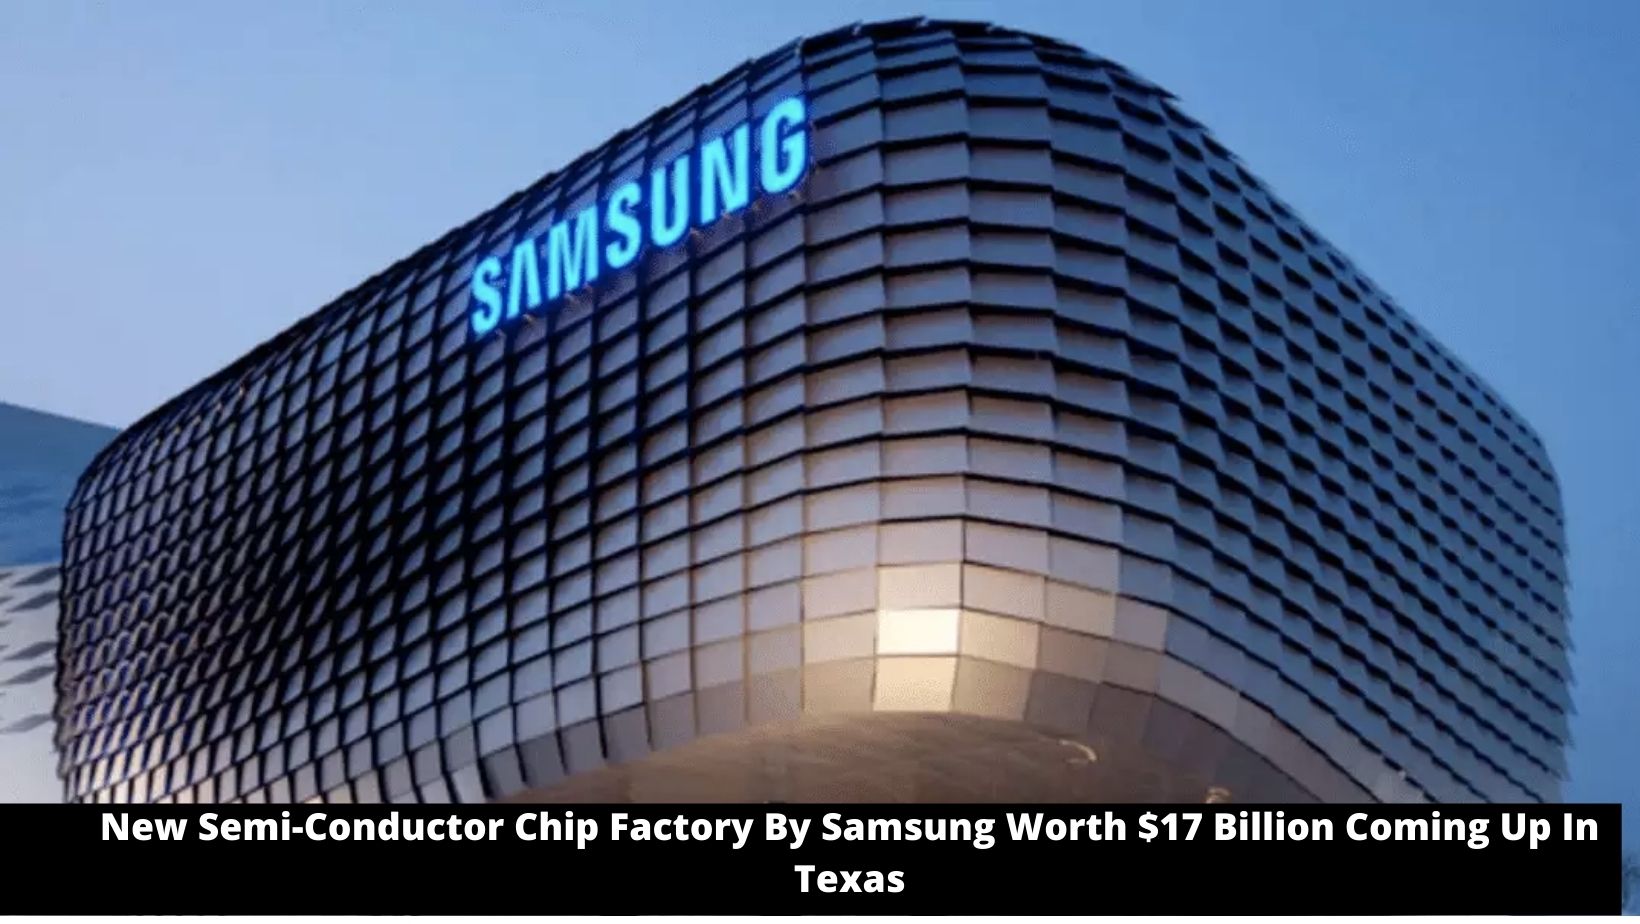 New Semi-Conductor Chip Factory By Samsung Worth $17 Billion Coming Up In Texas